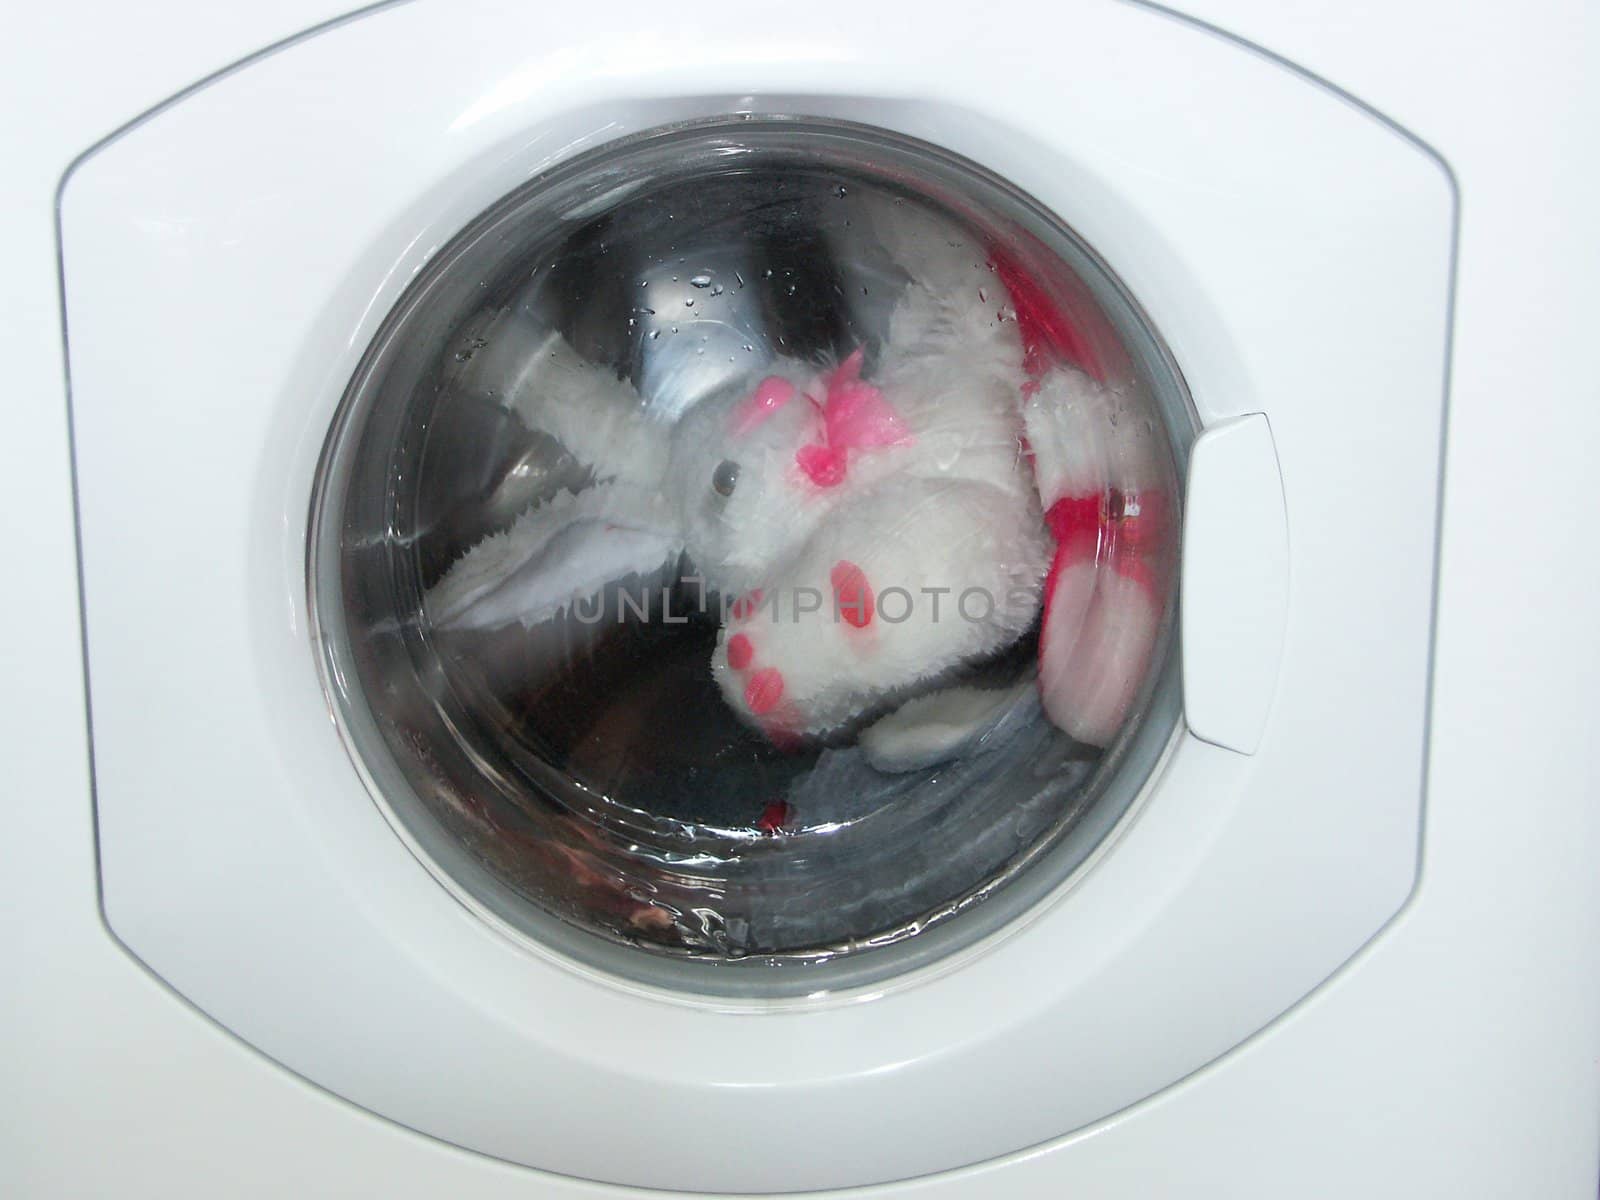 Toys in washing by soloir